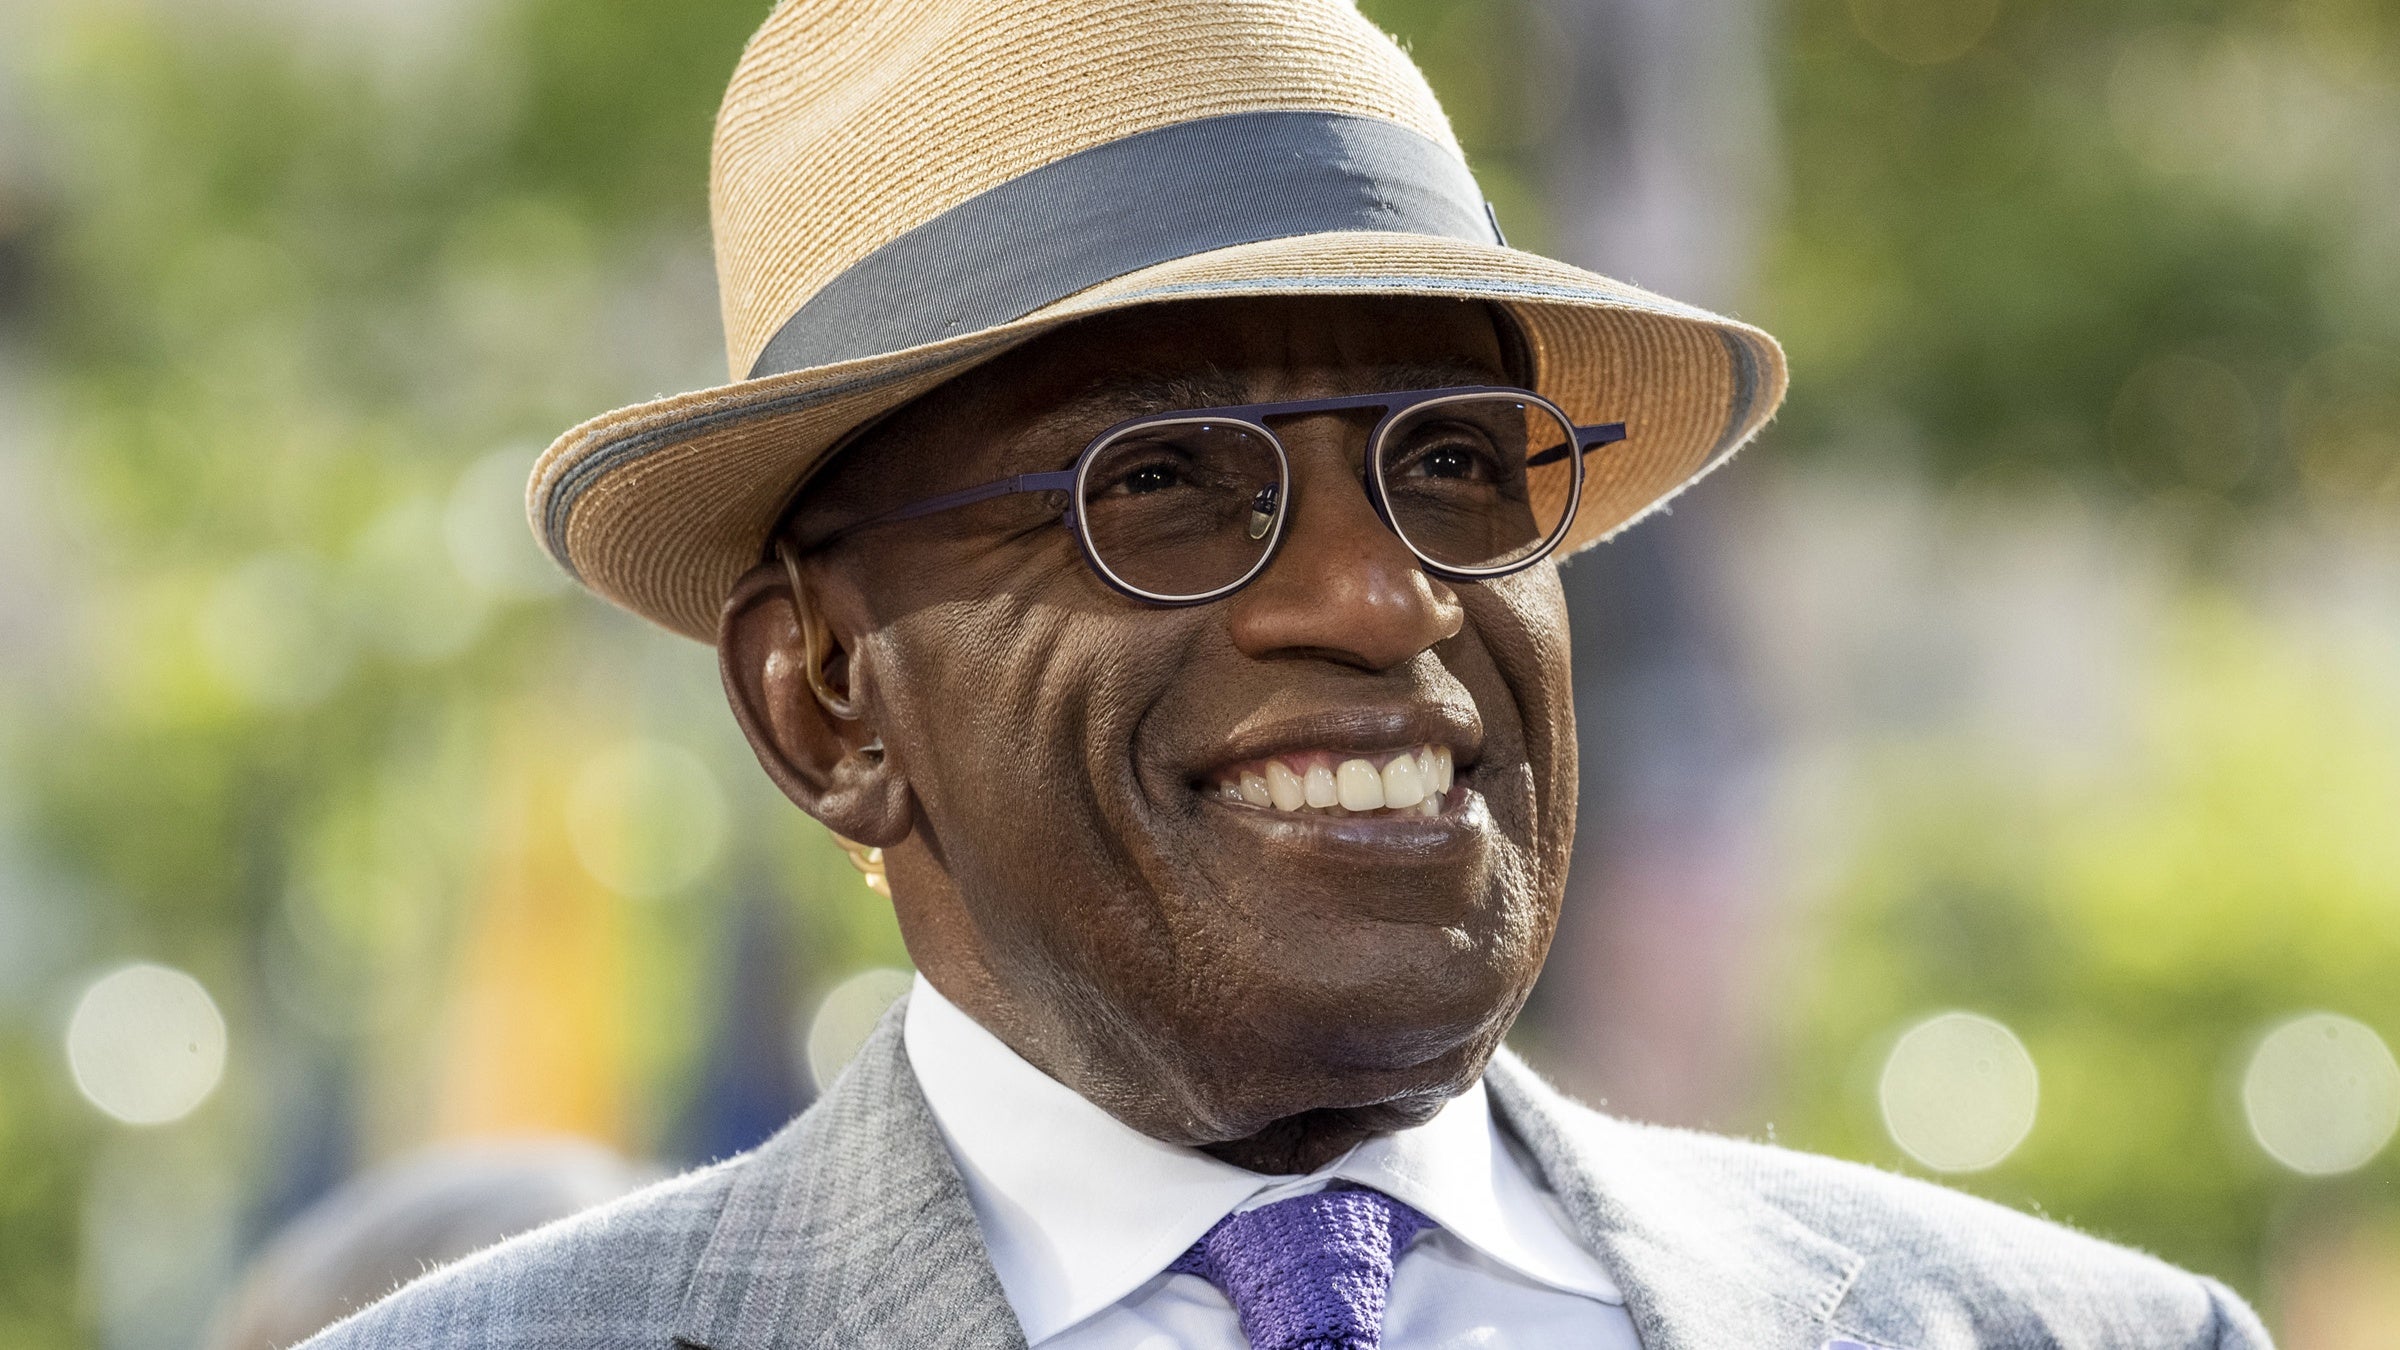 Al Roker Is ‘Incredibly Grateful’ To Return Home From The Hospital